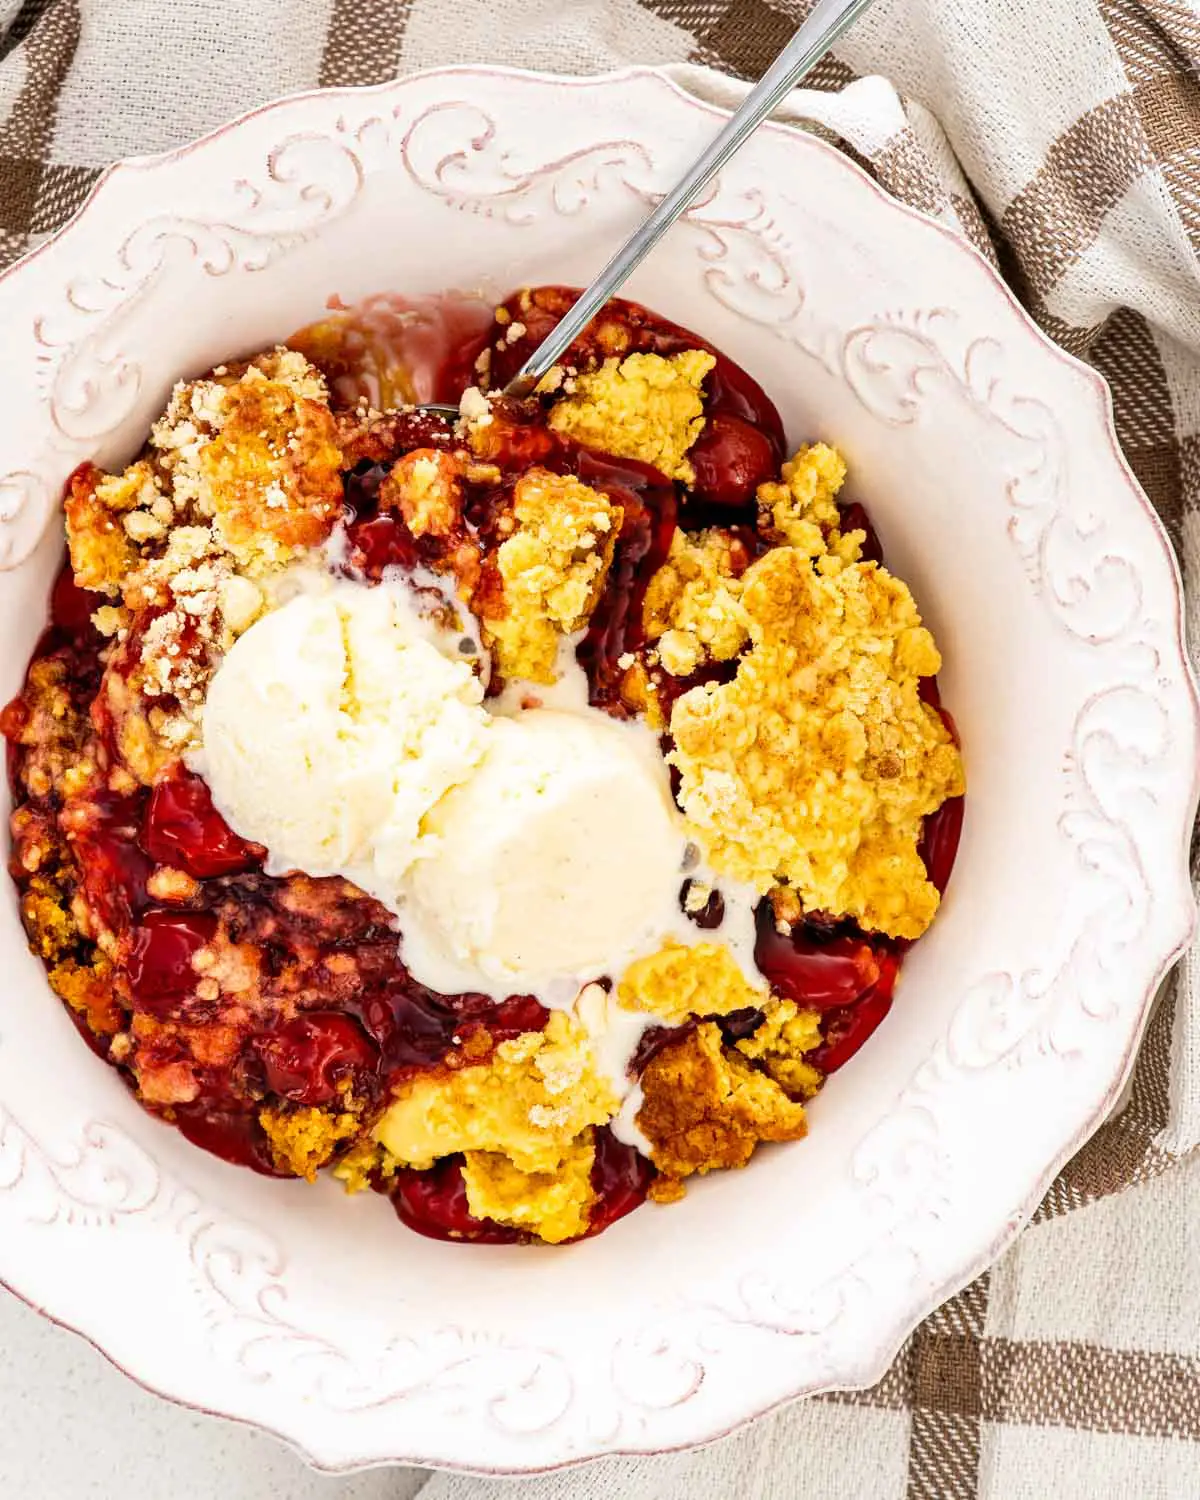 cherry dump cake in a plate with a scoop of ice cream.